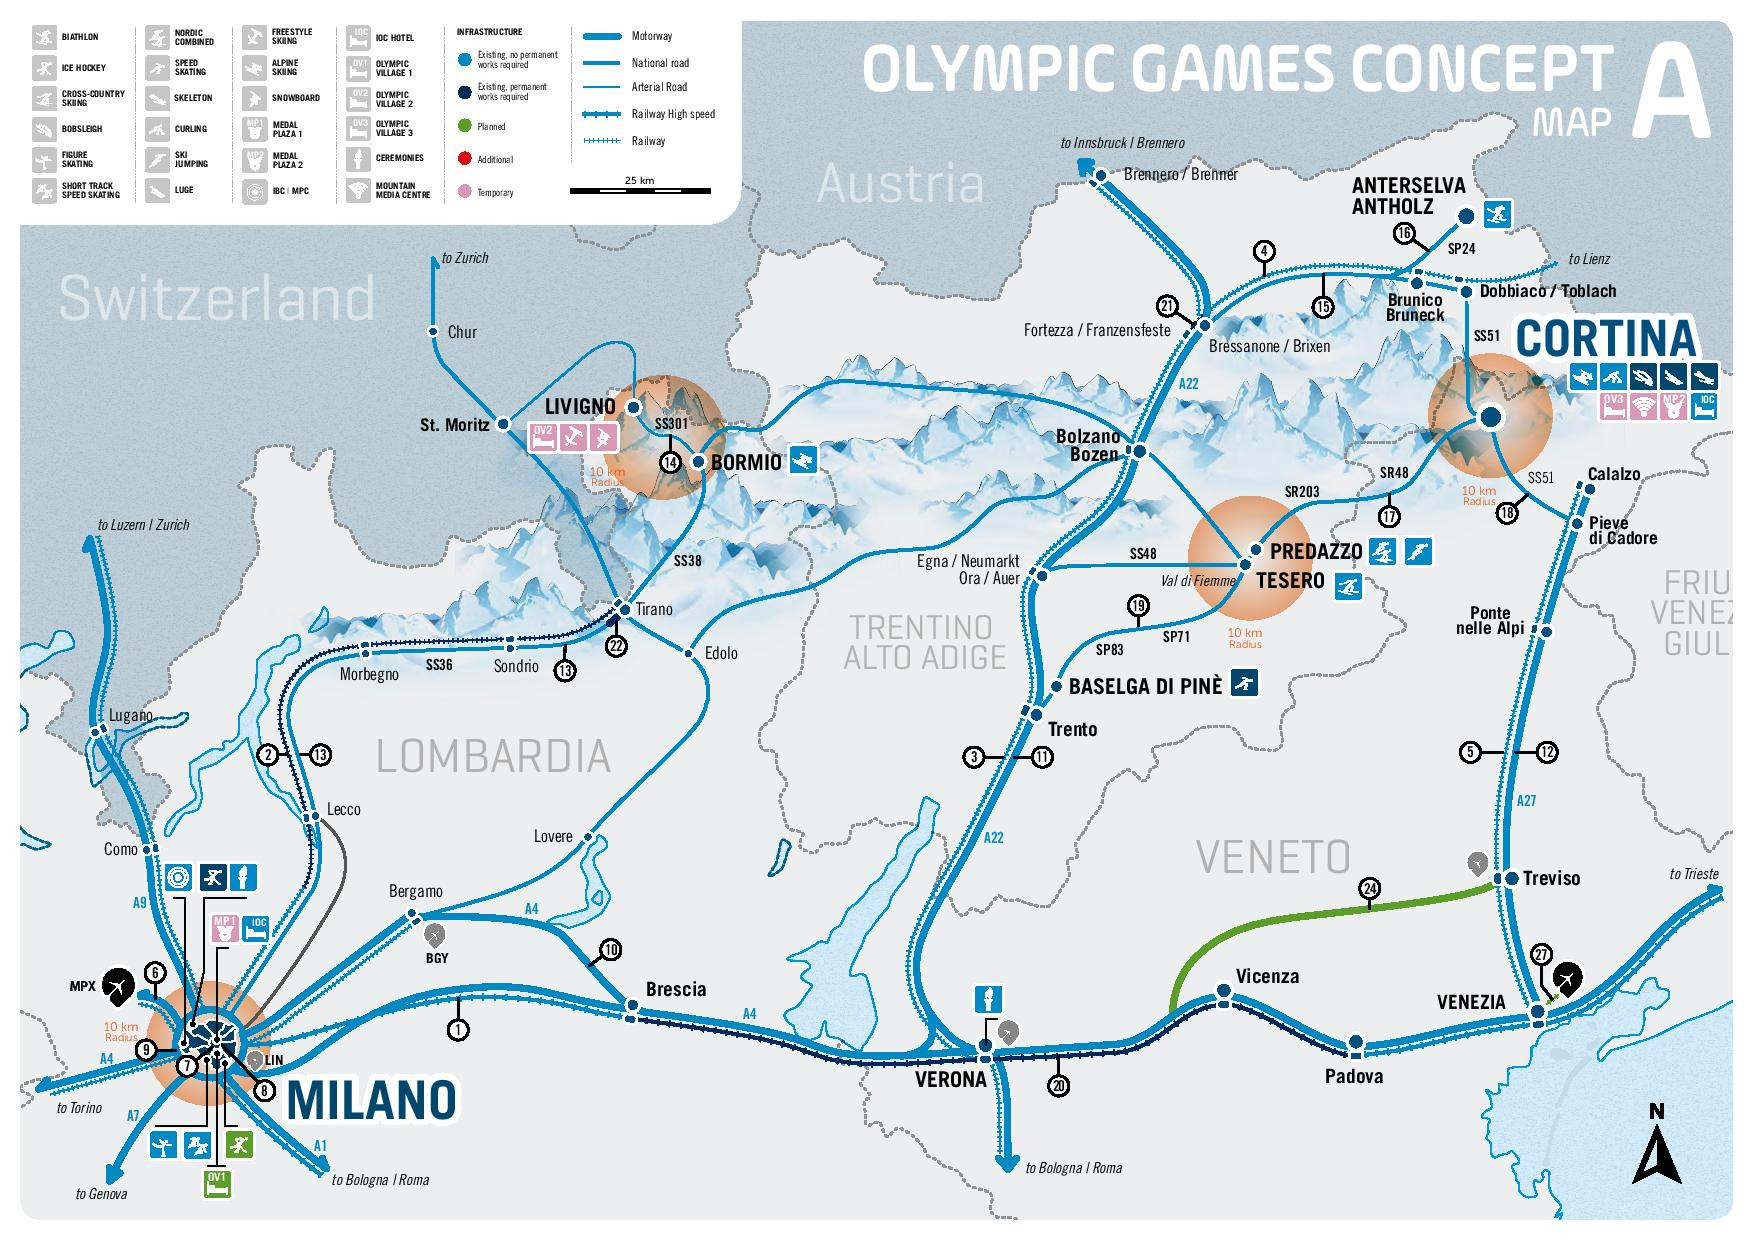 The 2026 Winter Olympic Games will be staged across an area of 22,000 kilometres with the two host cities Milan and Cortina d’Ampezzo located a four-and-a-half hour drive apart from each other ©Milan Cortina 2026